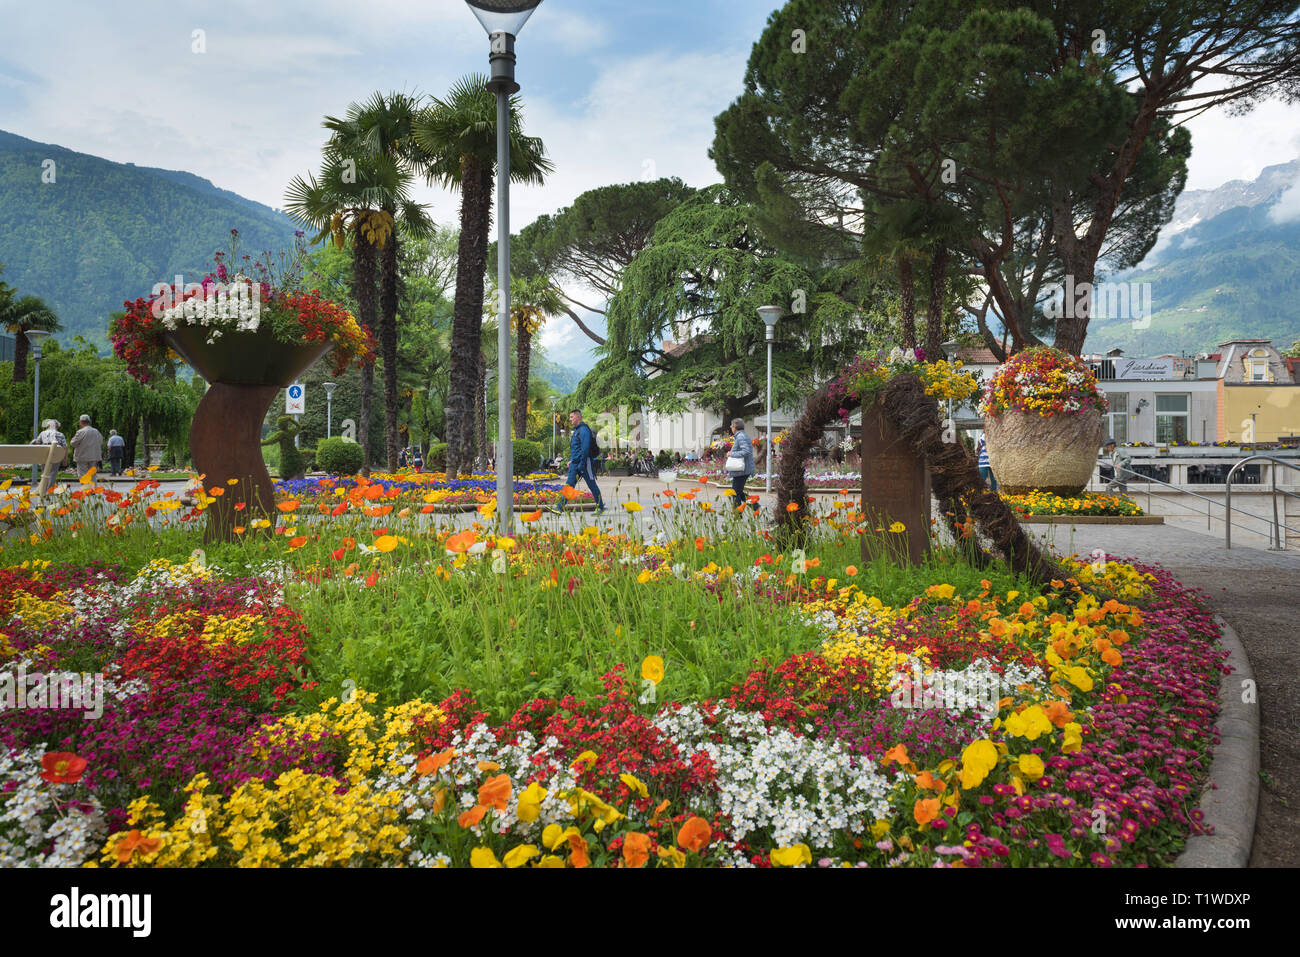 Merano/Italy - 05/05/18: in South Tyrol, a beautiful city of Trentino Alto Adige, View on the famous promenade along the Passirio river. Northern Ital Stock Photo